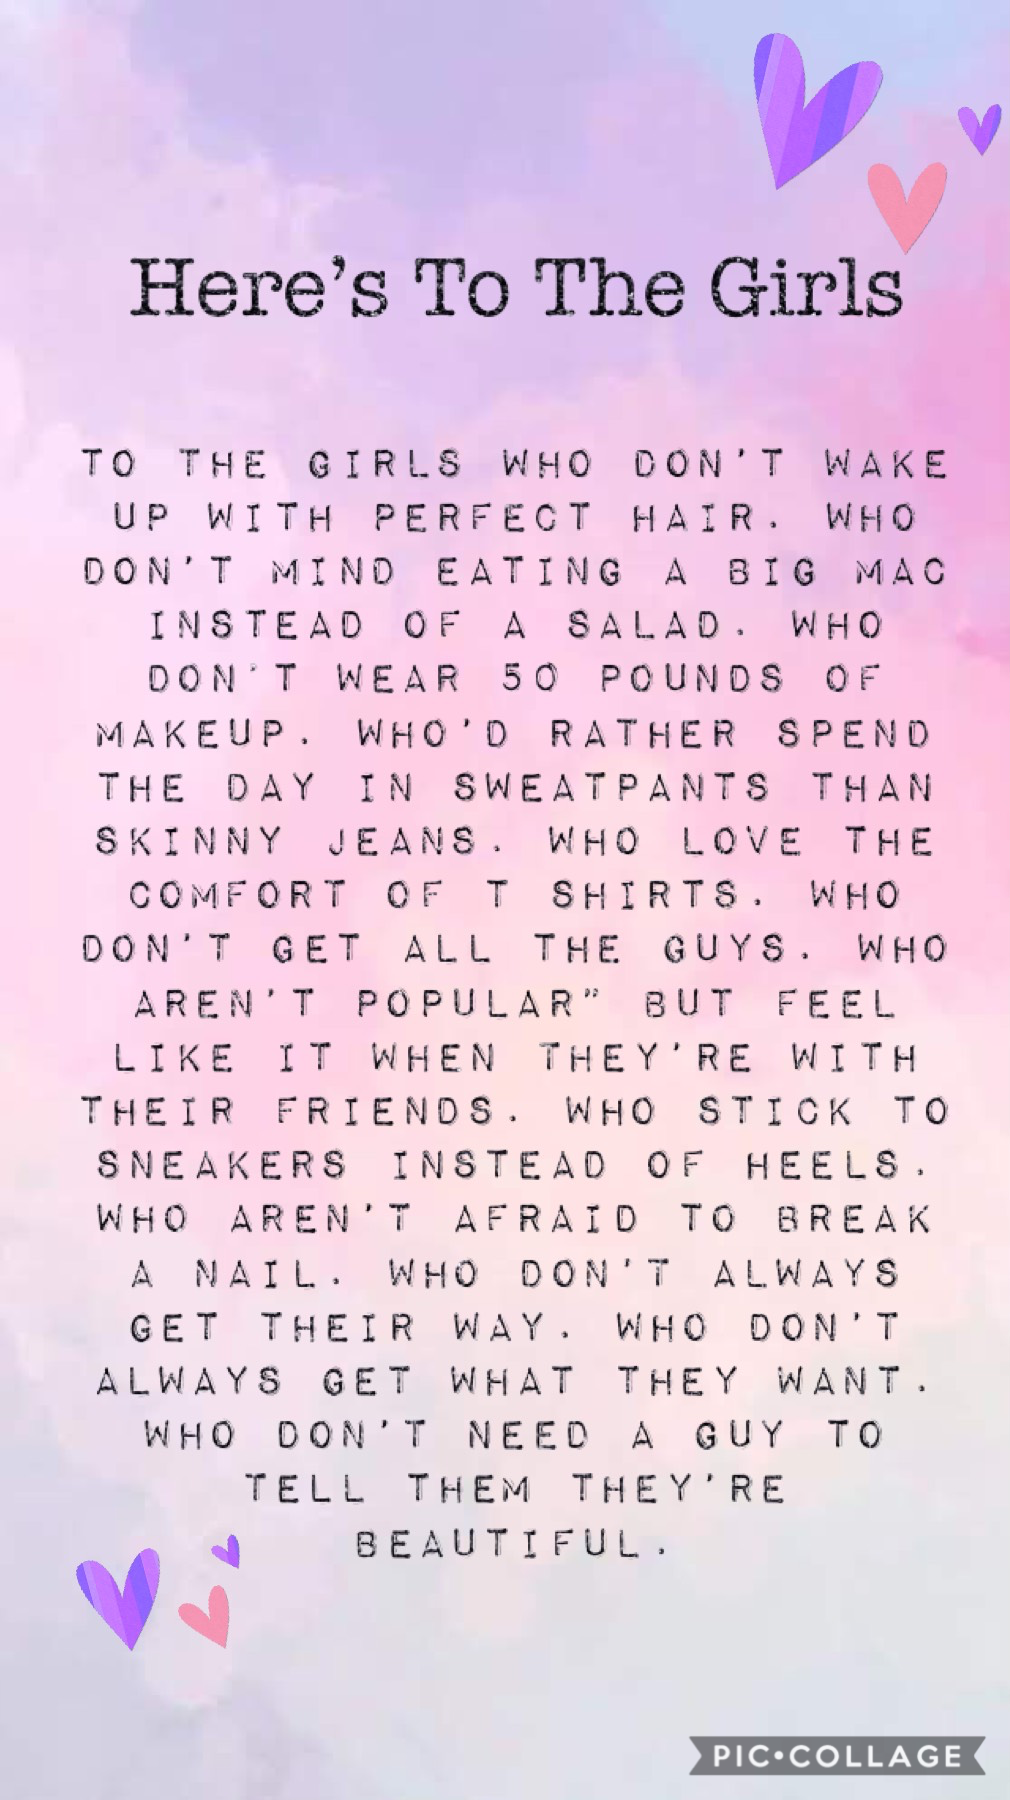 Every girl should read this 💕💕